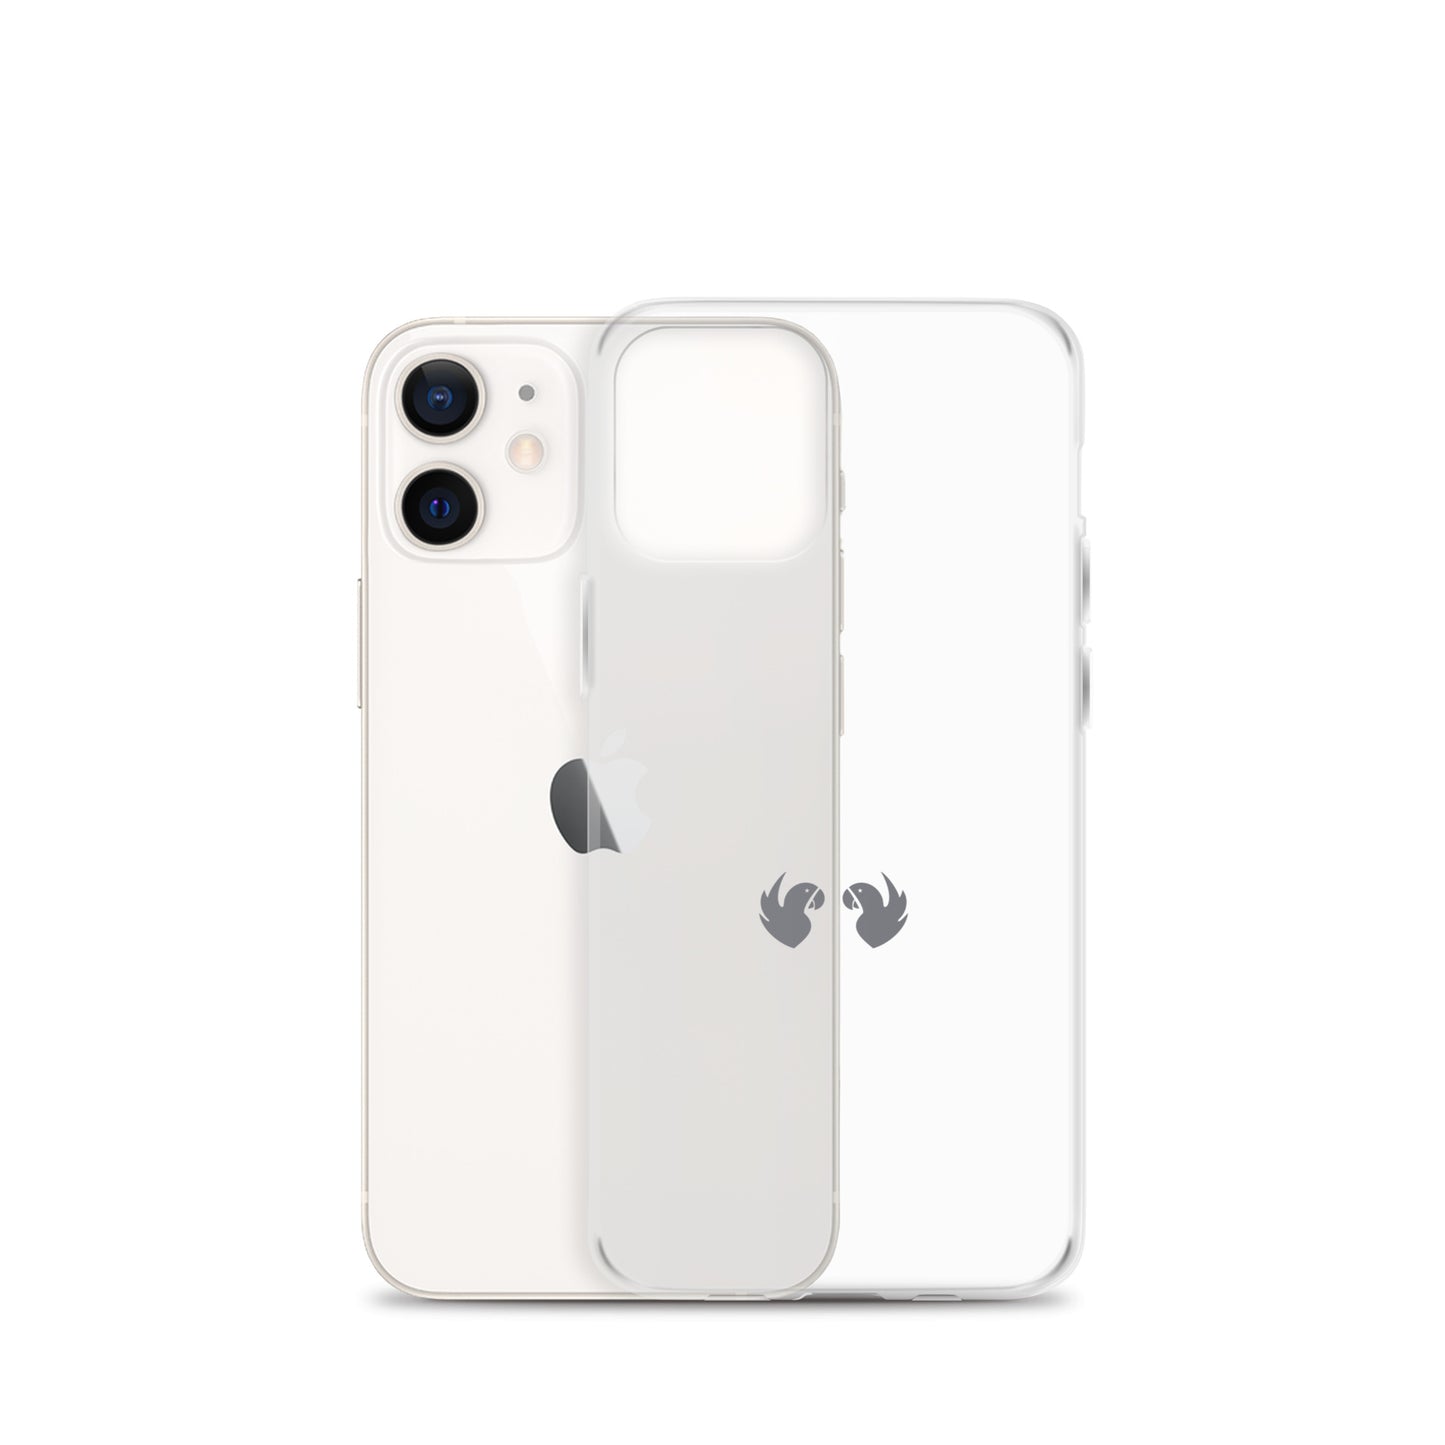 Crystal-Clear iPhone Case: Show Off Your Style Without Compromise  pen_spark